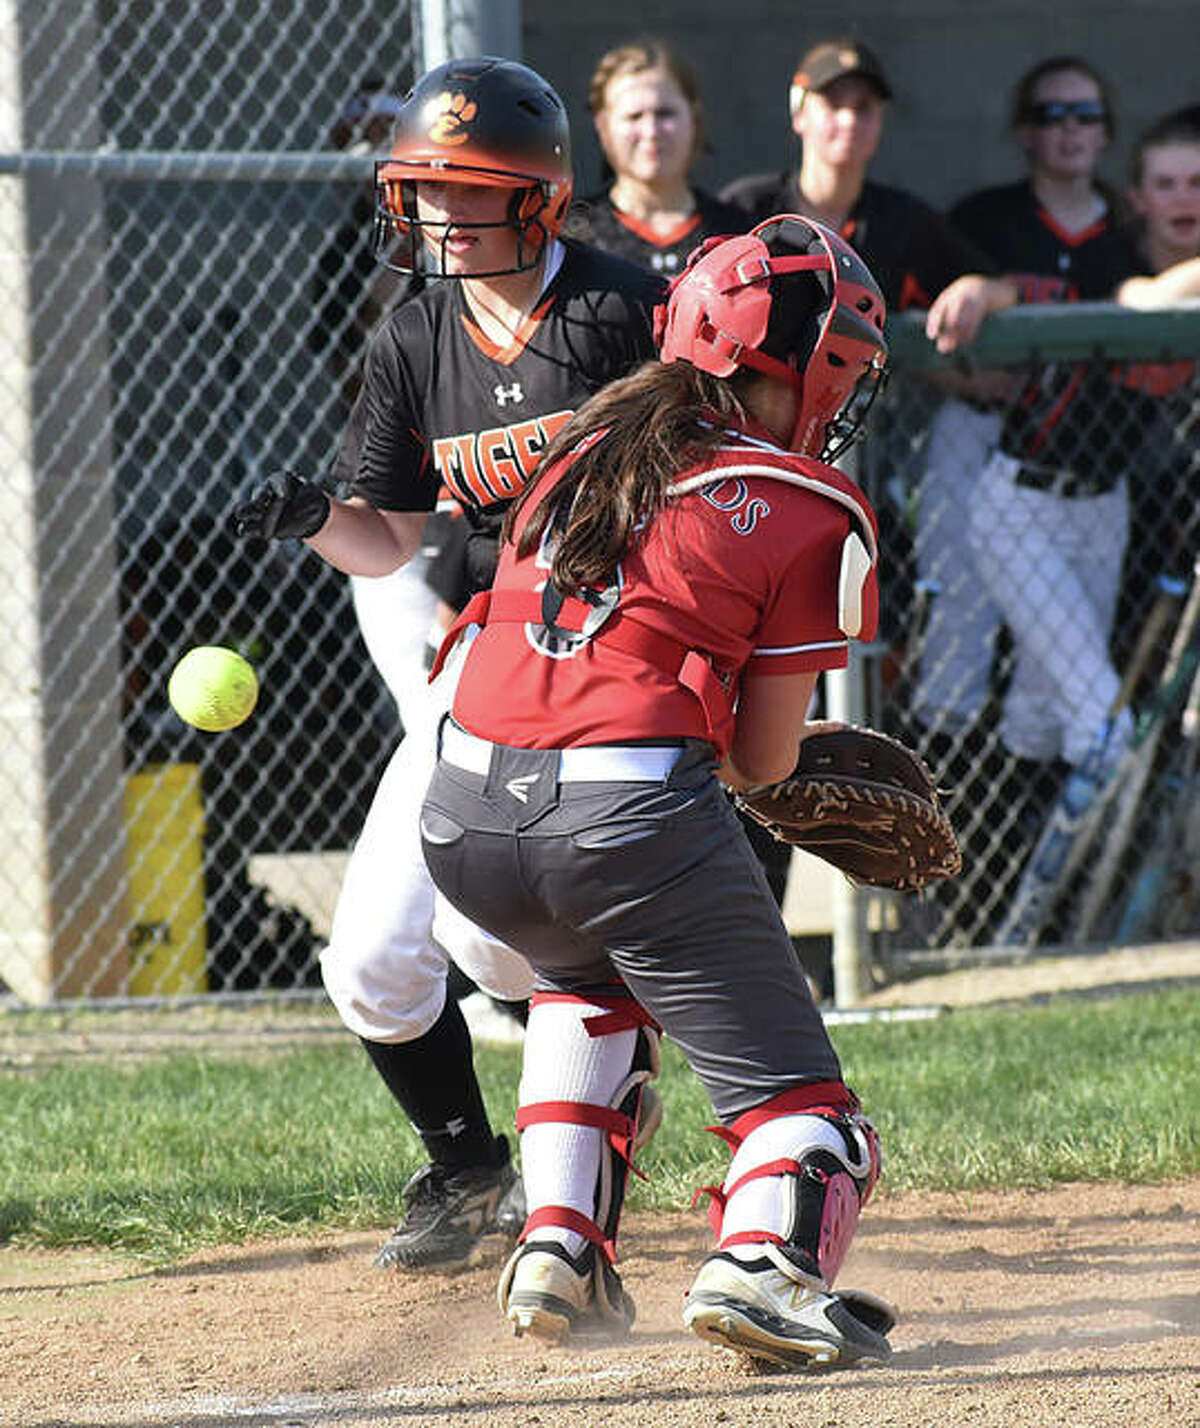 Edwardsville’s Sydney Lawrence scores in the fourth inning as the ball gets away from Alton catcher Audrey Evola on Thursday in Alton.